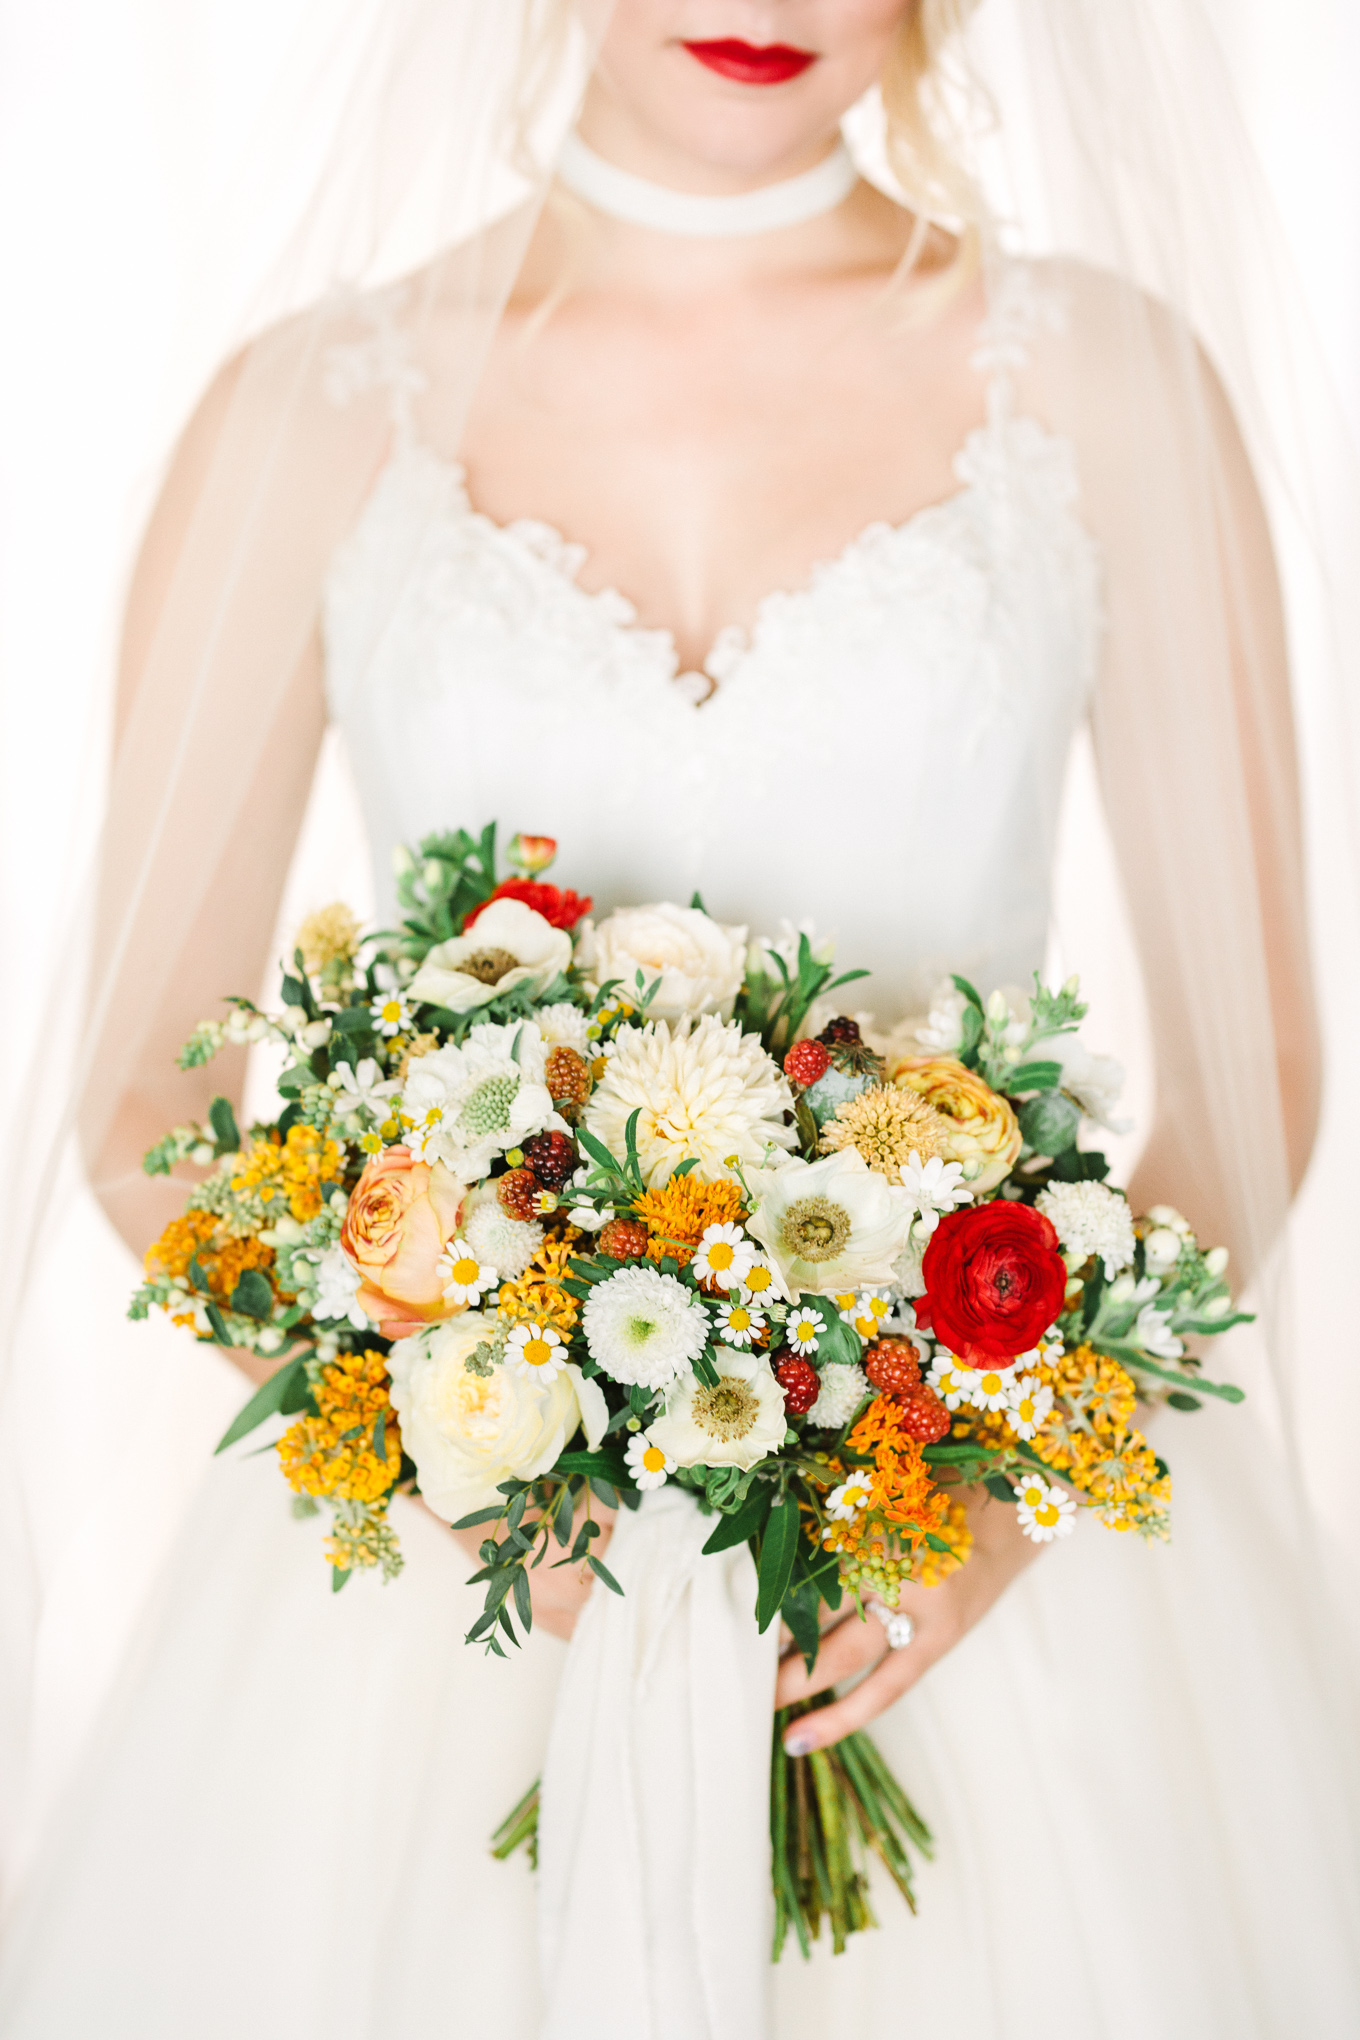 Whimsical yellow, orange, and red wedding flowers | Beautiful bridal bouquet inspiration and advice | Colorful and elevated wedding photography for fun-loving couples in Southern California | #weddingflowers #weddingbouquet #bridebouquet #bouquetideas #uniquebouquet   Source: Mary Costa Photography | Los Angeles